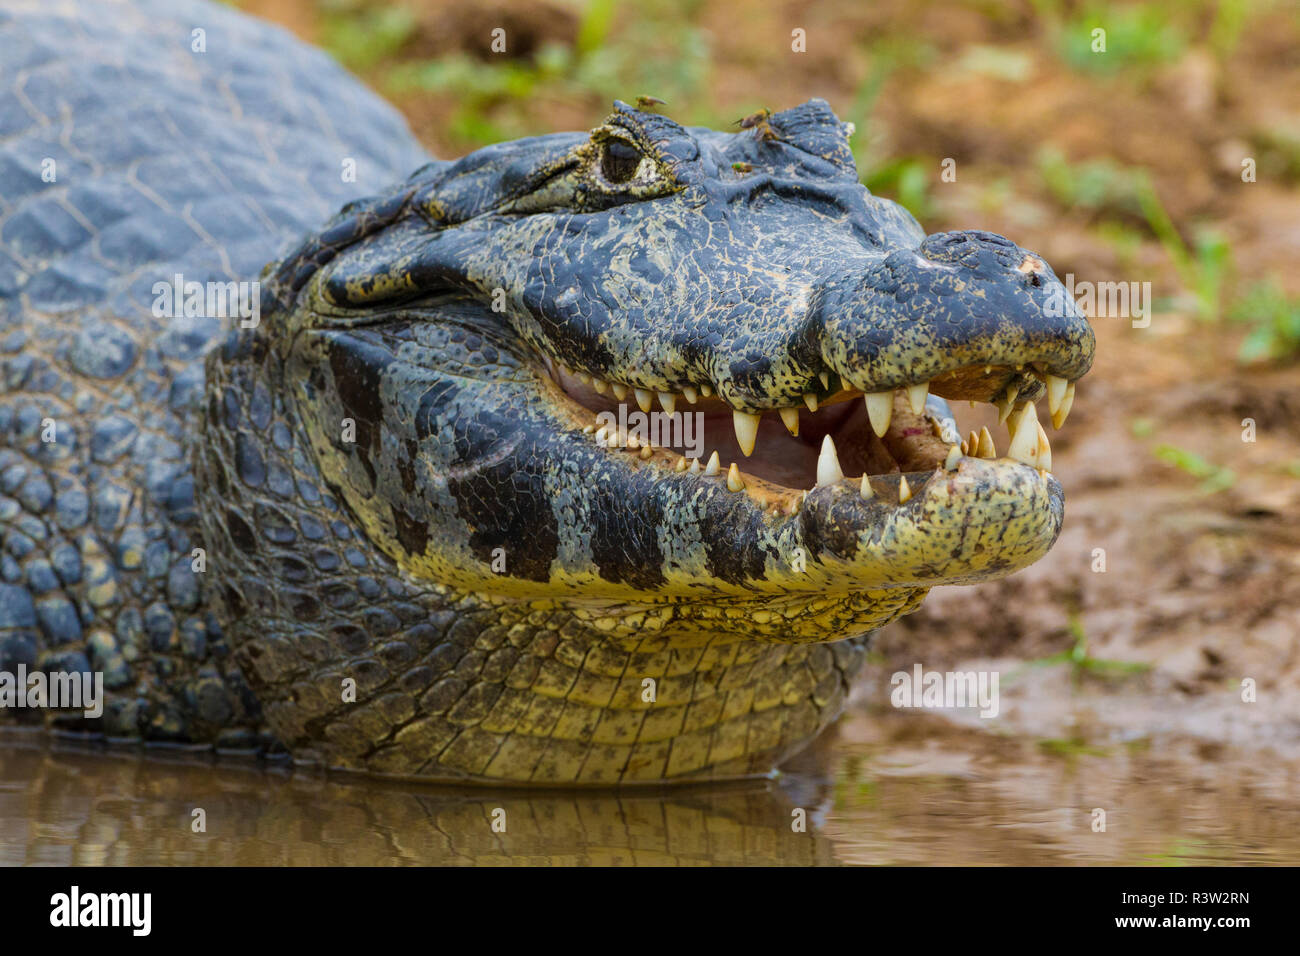 Brazil. A spectacled caiman (Caiman crocodilus) commonly found in the Pantanal, the world's largest tropical wetland area, UNESCO World Heritage Site. Stock Photo